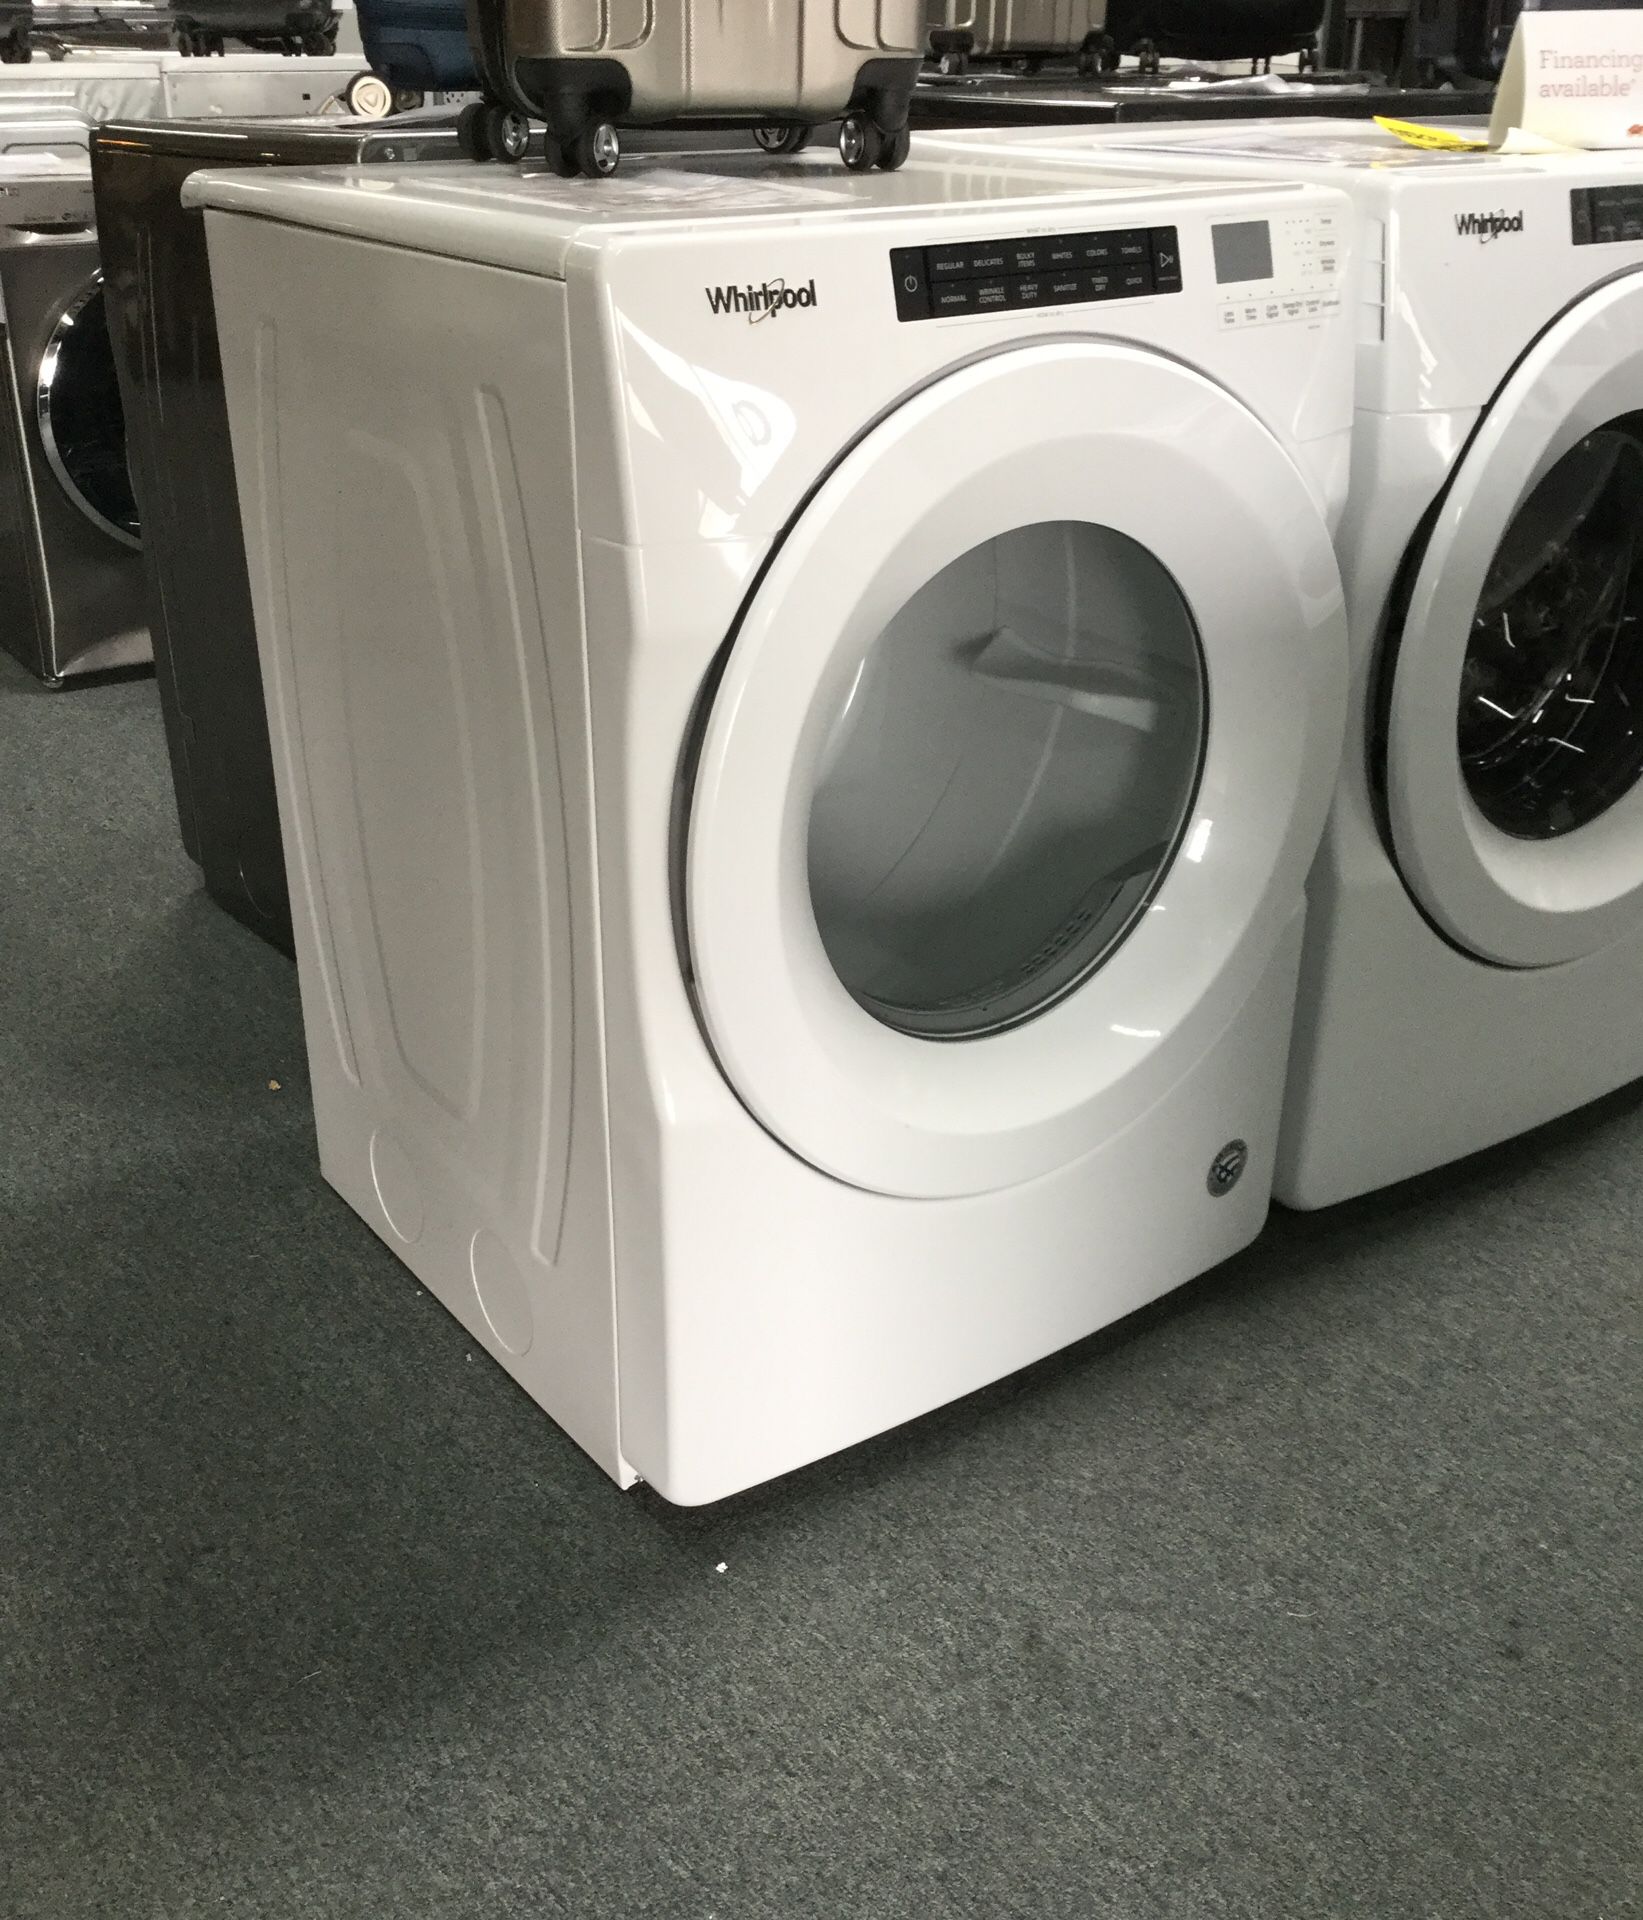 Dryer gas dryer whirlpool front load original price $999 our price $668 Prices are negotiable